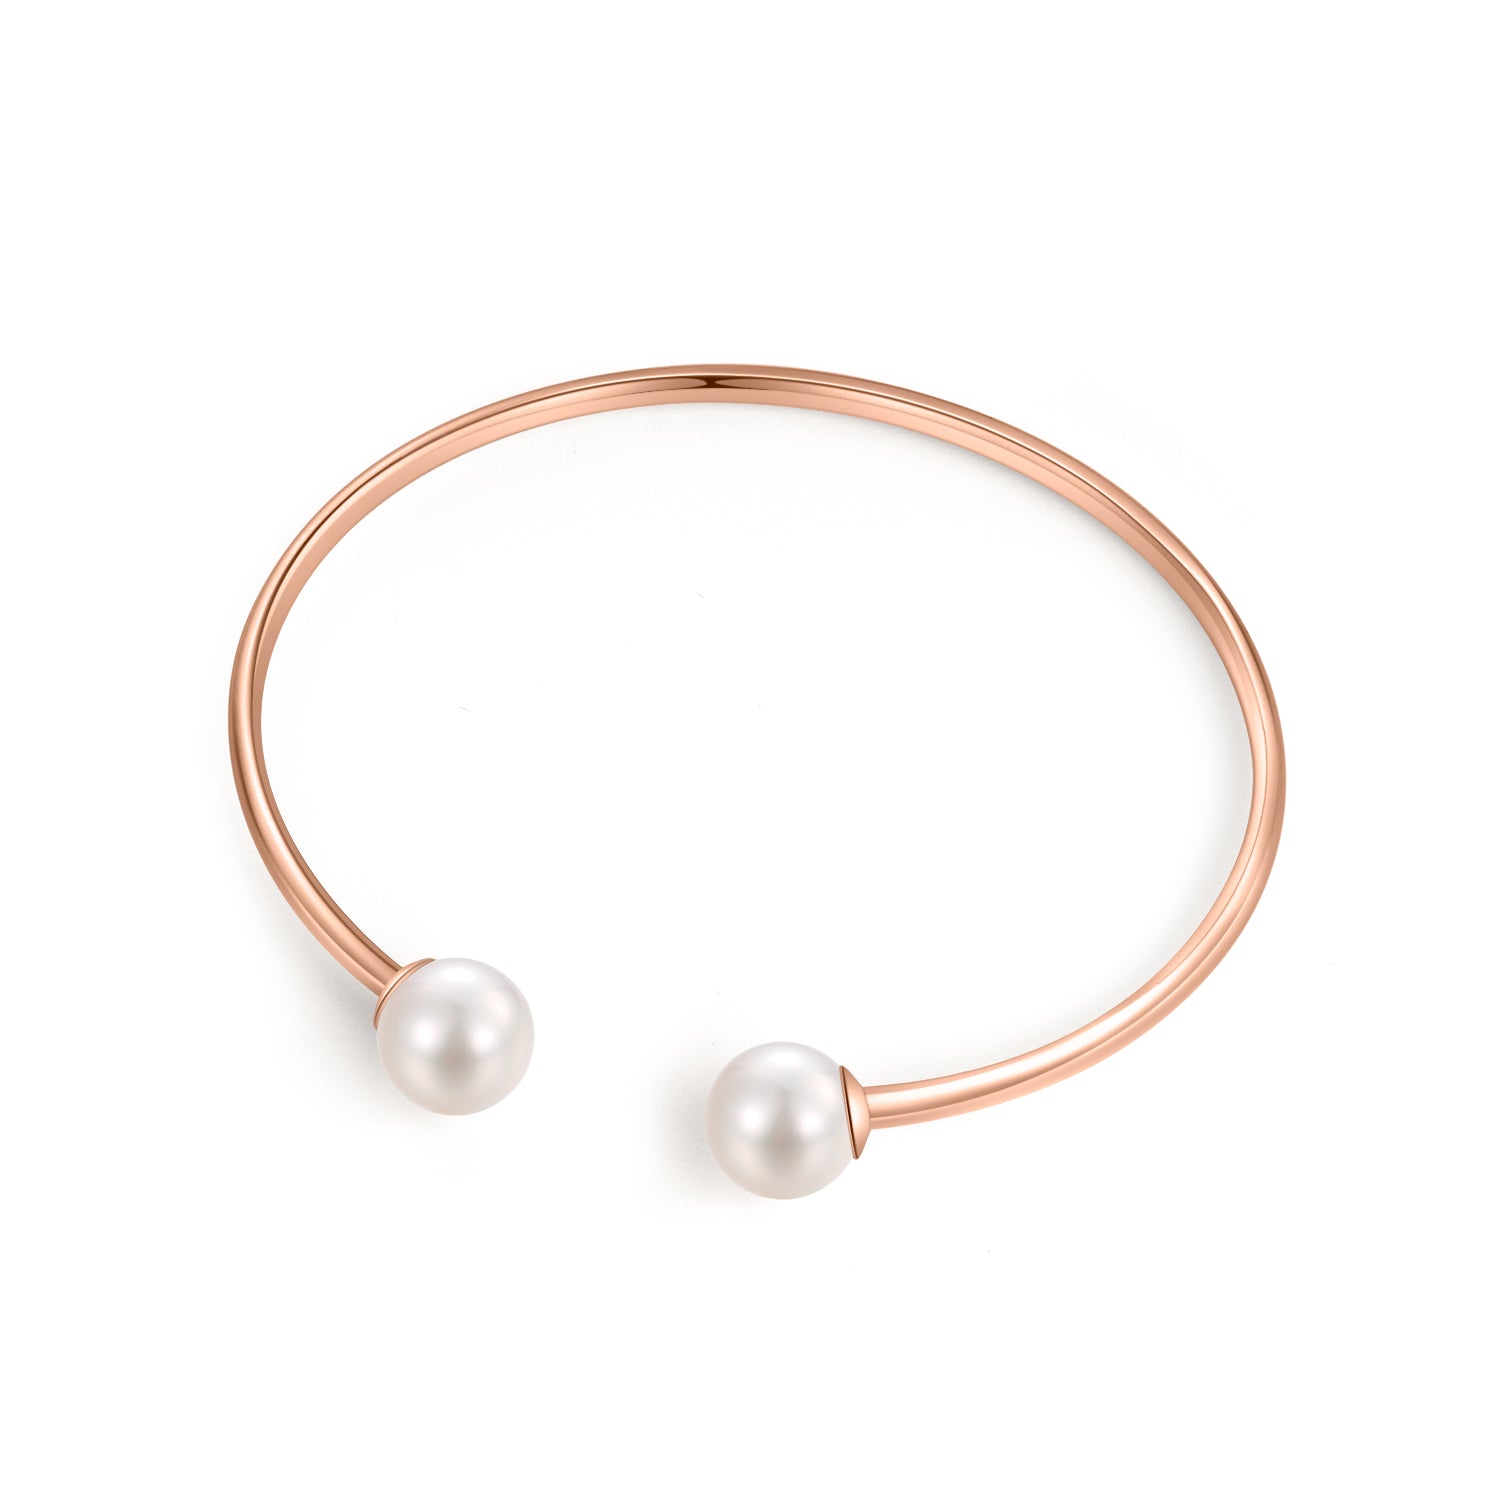 18K Rose Gold Bangle With 8-8.5mm Akoya Pearl - Woment Designer Jewelry